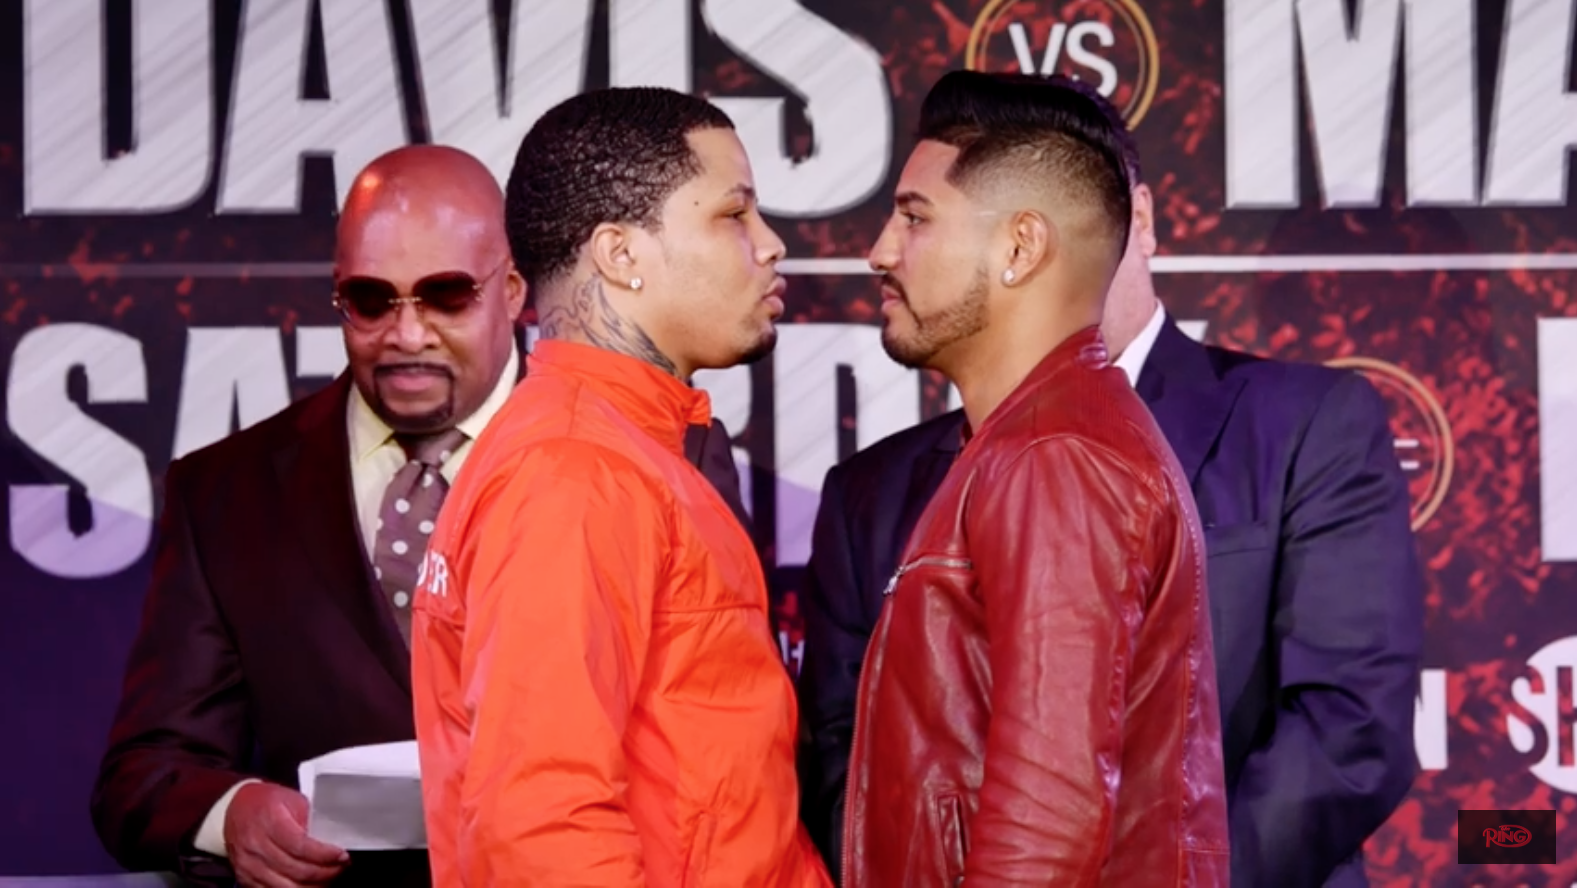 WATCH: Gervonta Davis, Abner Mares meet face-to-face at LA press conference - The Ring1577 x 890